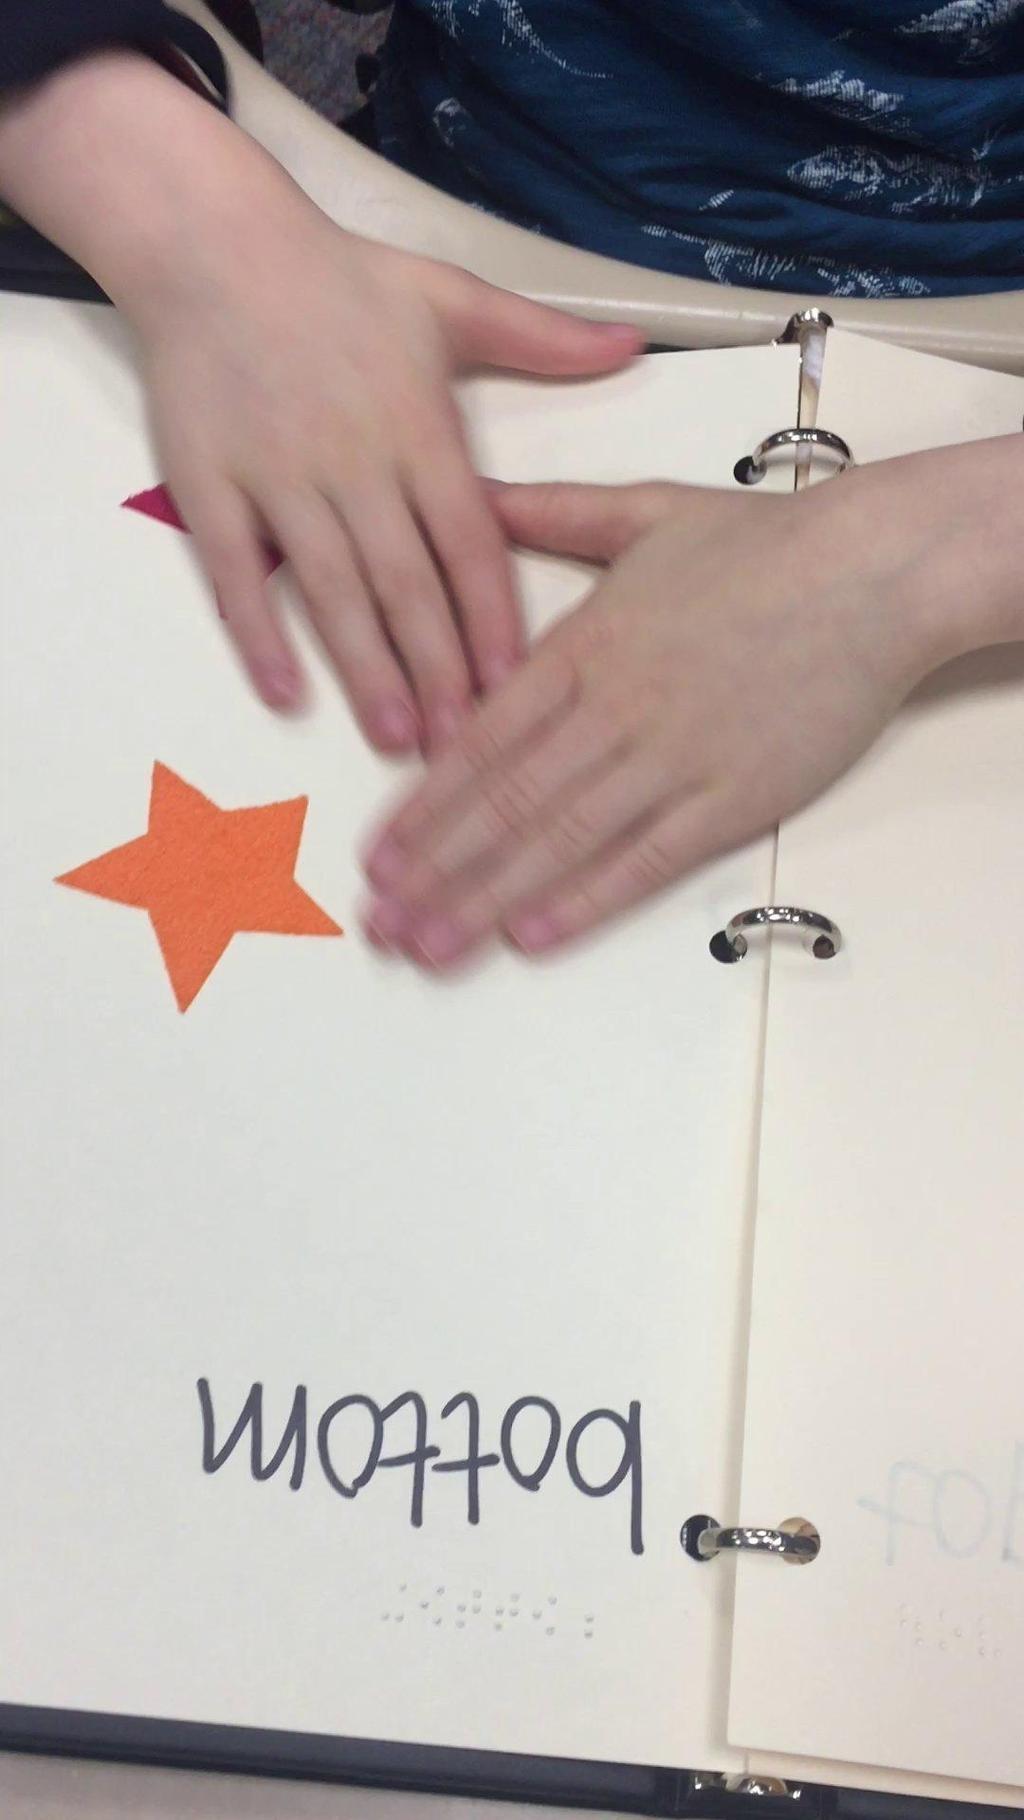 Visual Supports Classwork Video Description: Braille paper with bottom written in Braille and